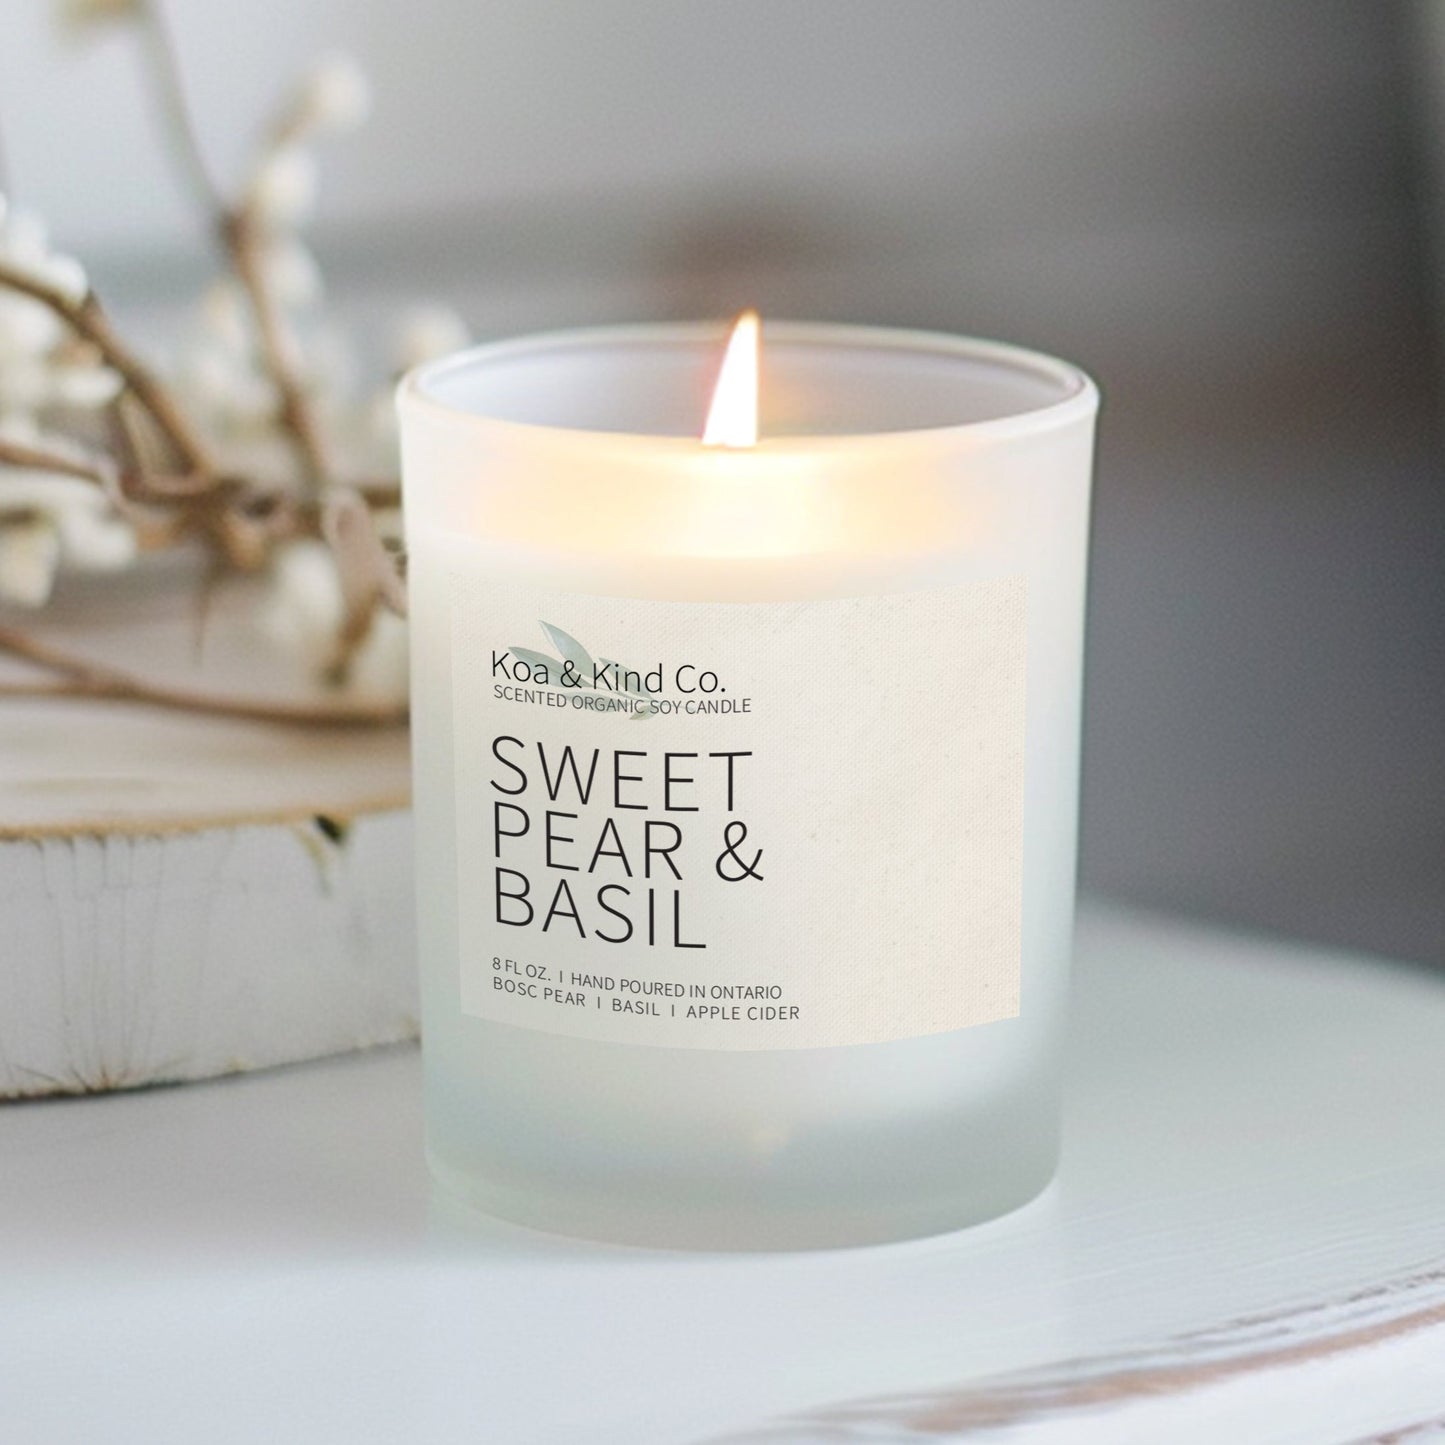 Sweet Pear & Basil Scented Soy Candle